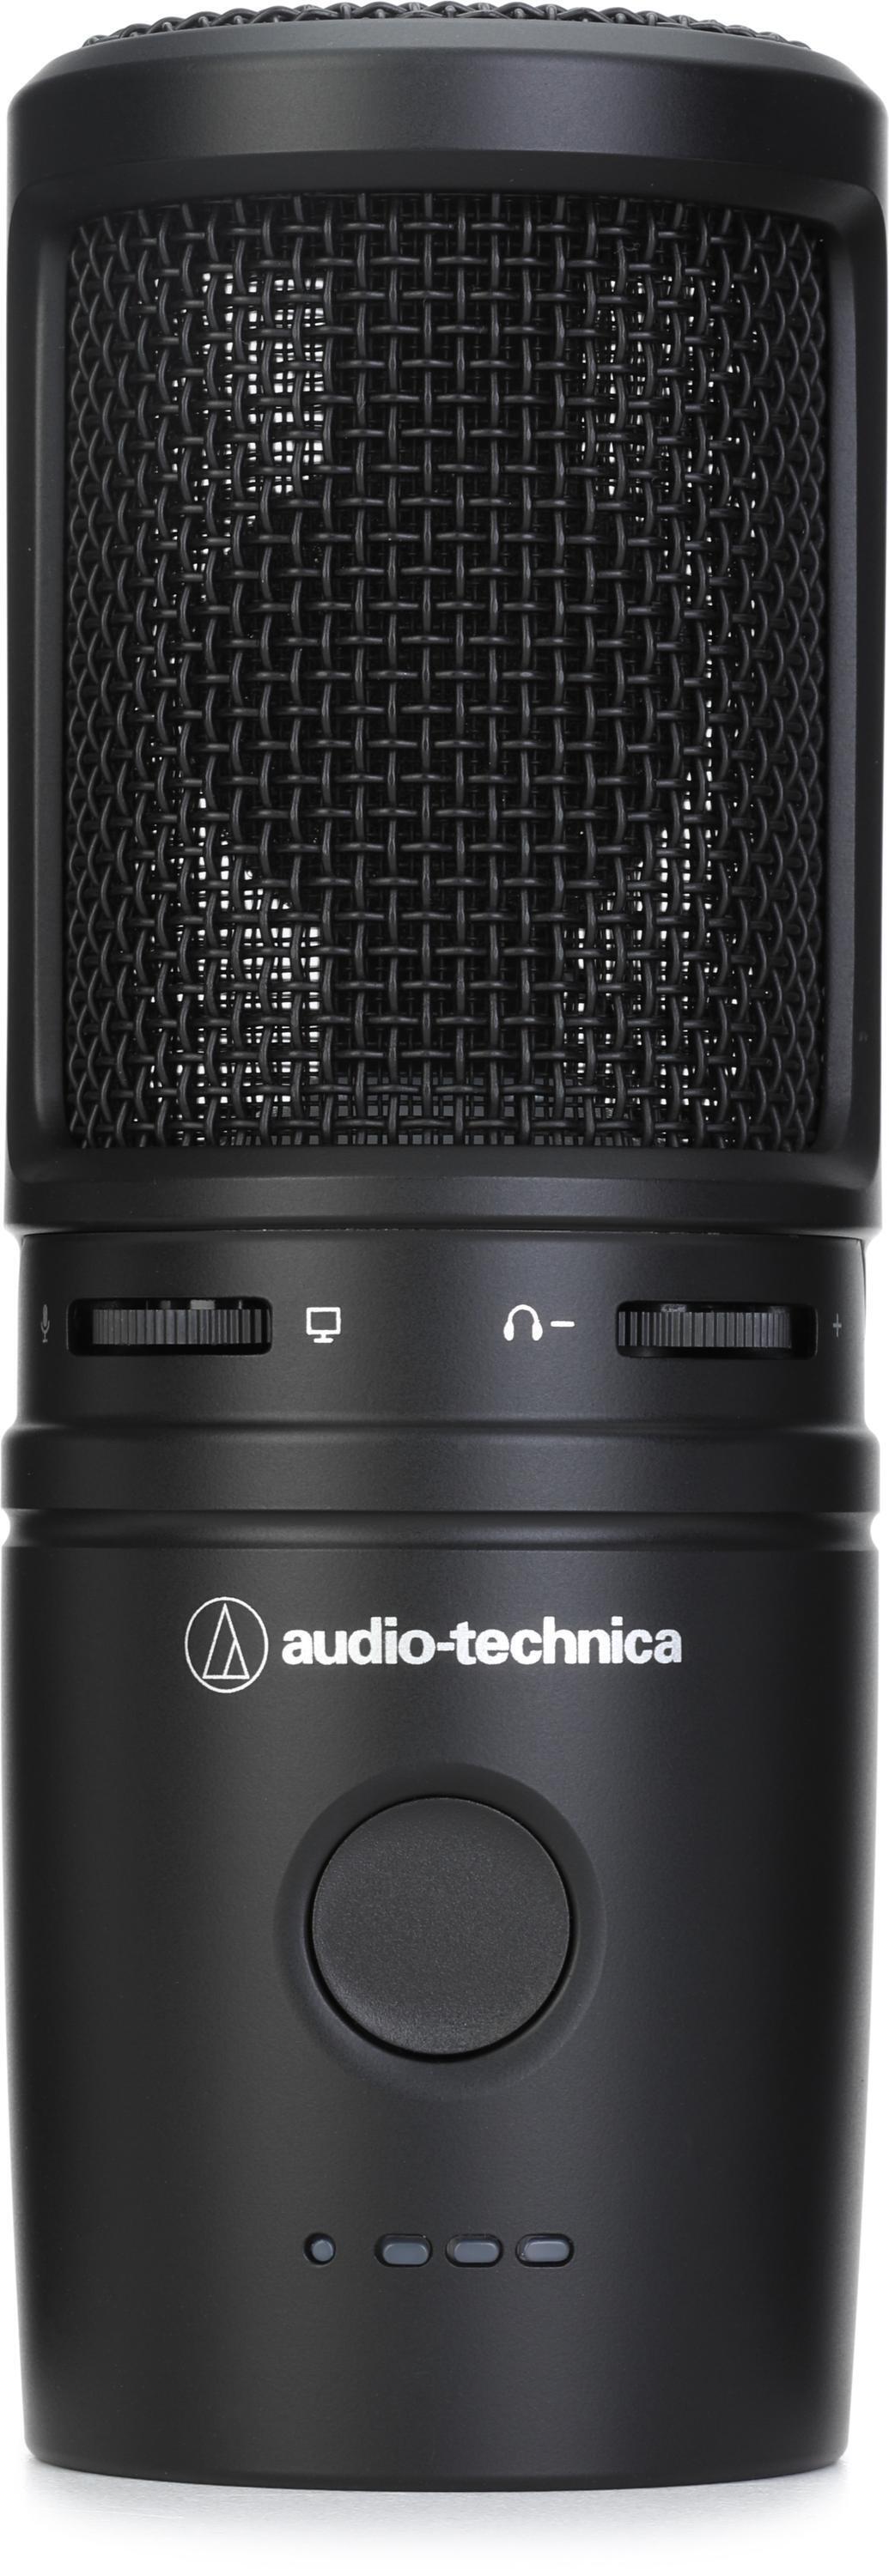  Audio-Technica AT2020USB+ Cardioid Condenser USB Microphone,  With Built-In Headphone Jack & Volume Control, Perfect for Content Creators  (Black) : Musical Instruments